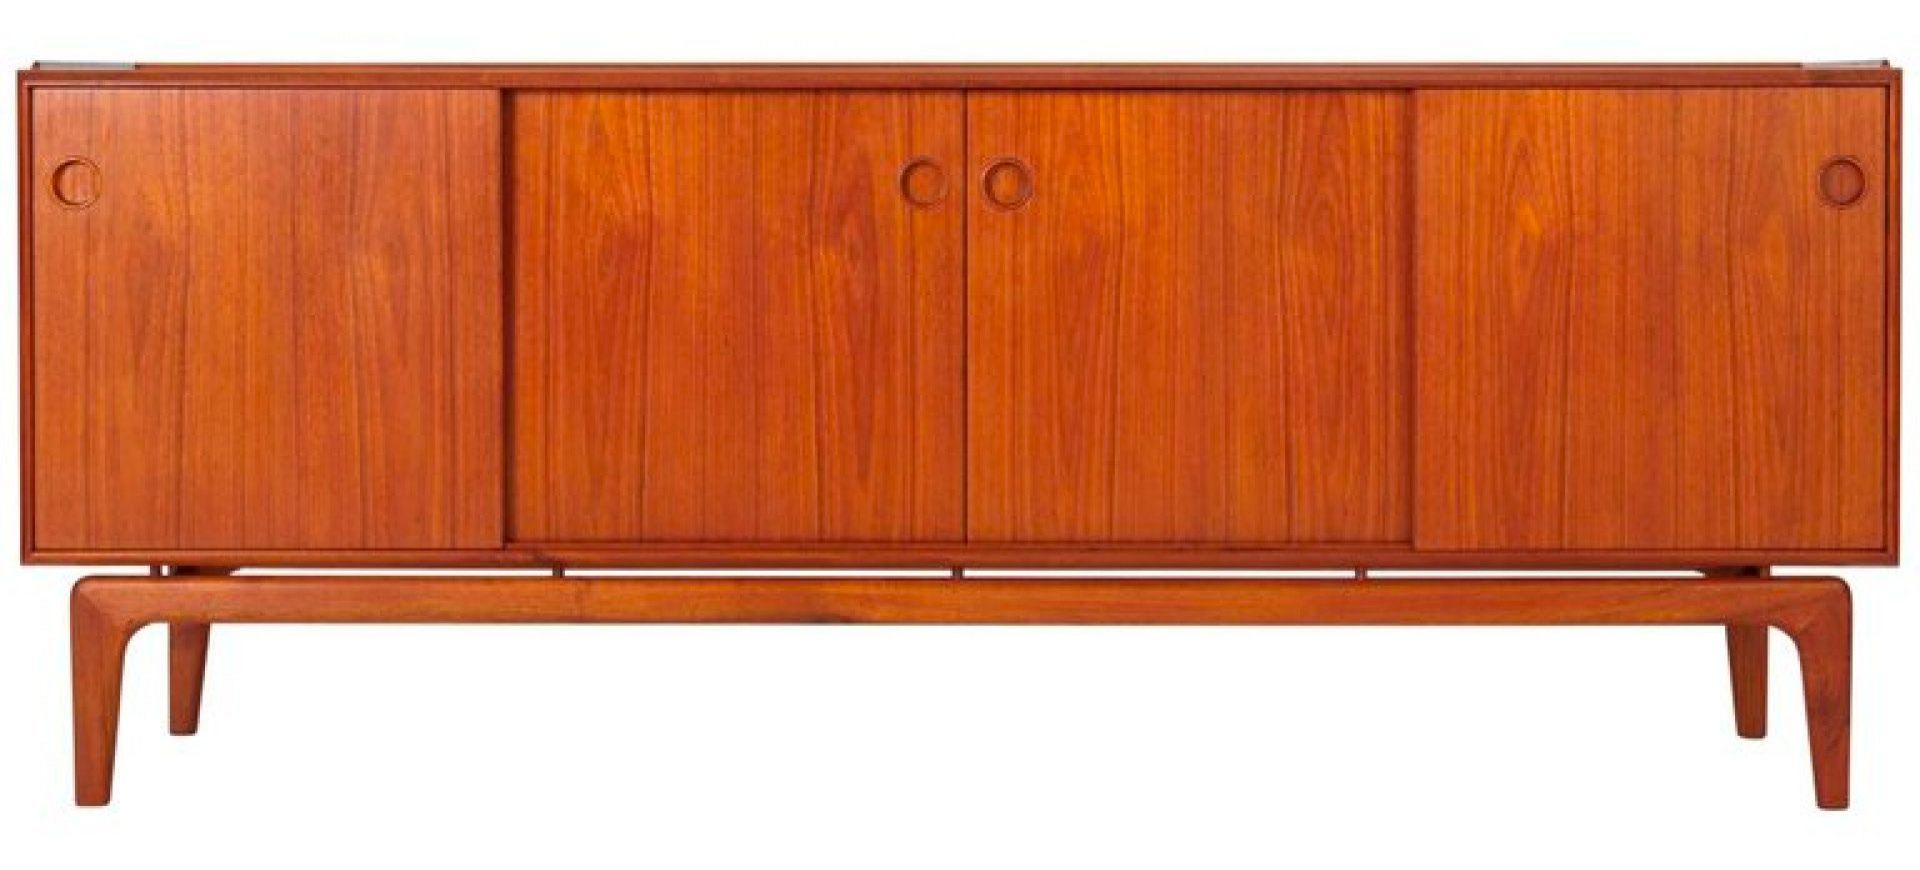 Top 12 Iconic Furniture Pieces